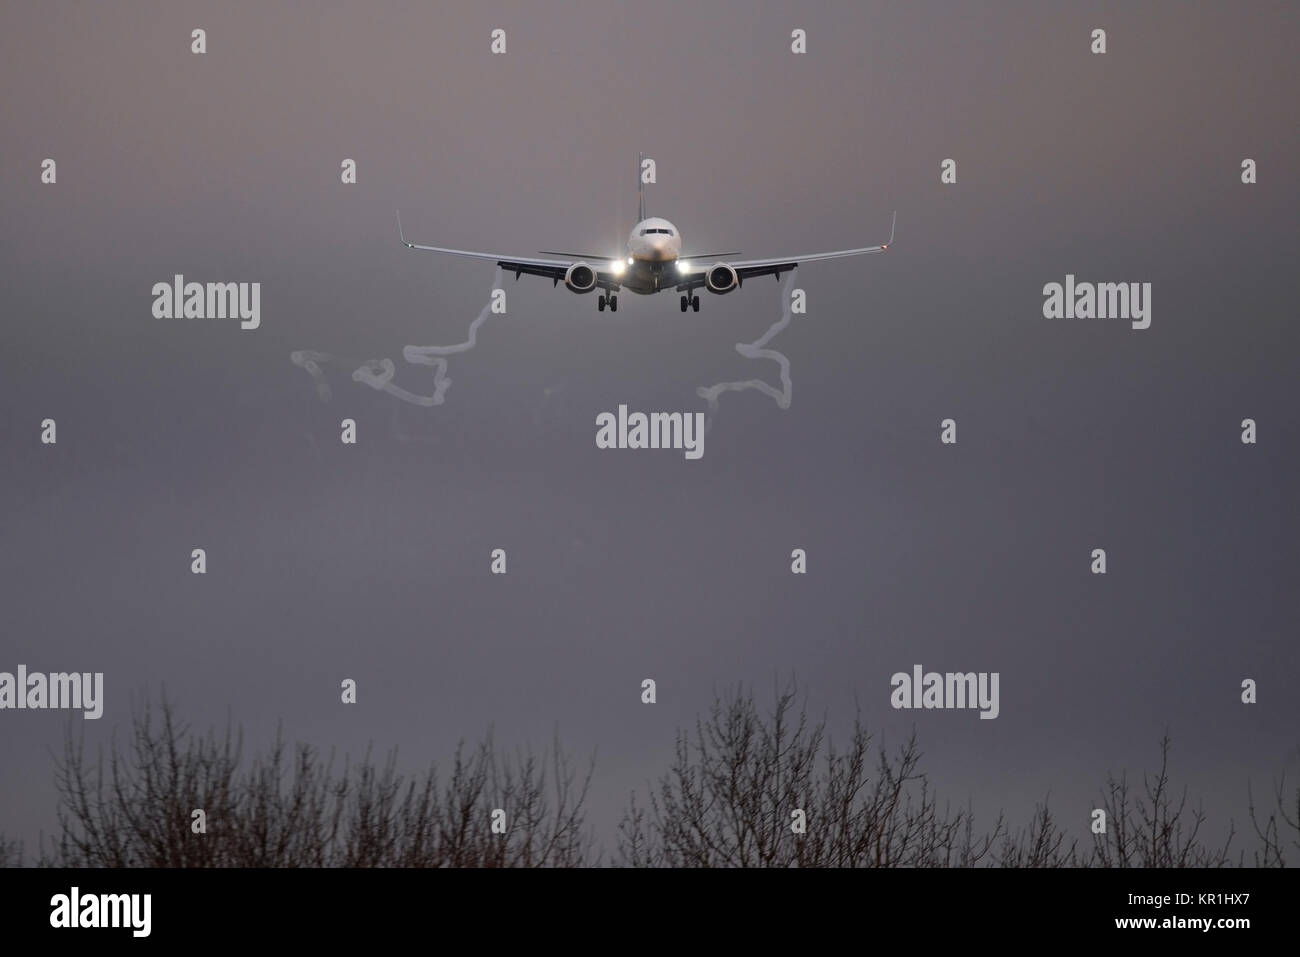 Ryanair Boeing 737 airliner jet plane landing at London Stansted Airport at dusk with landing lights shining bright and vortex vortices trailing Stock Photo